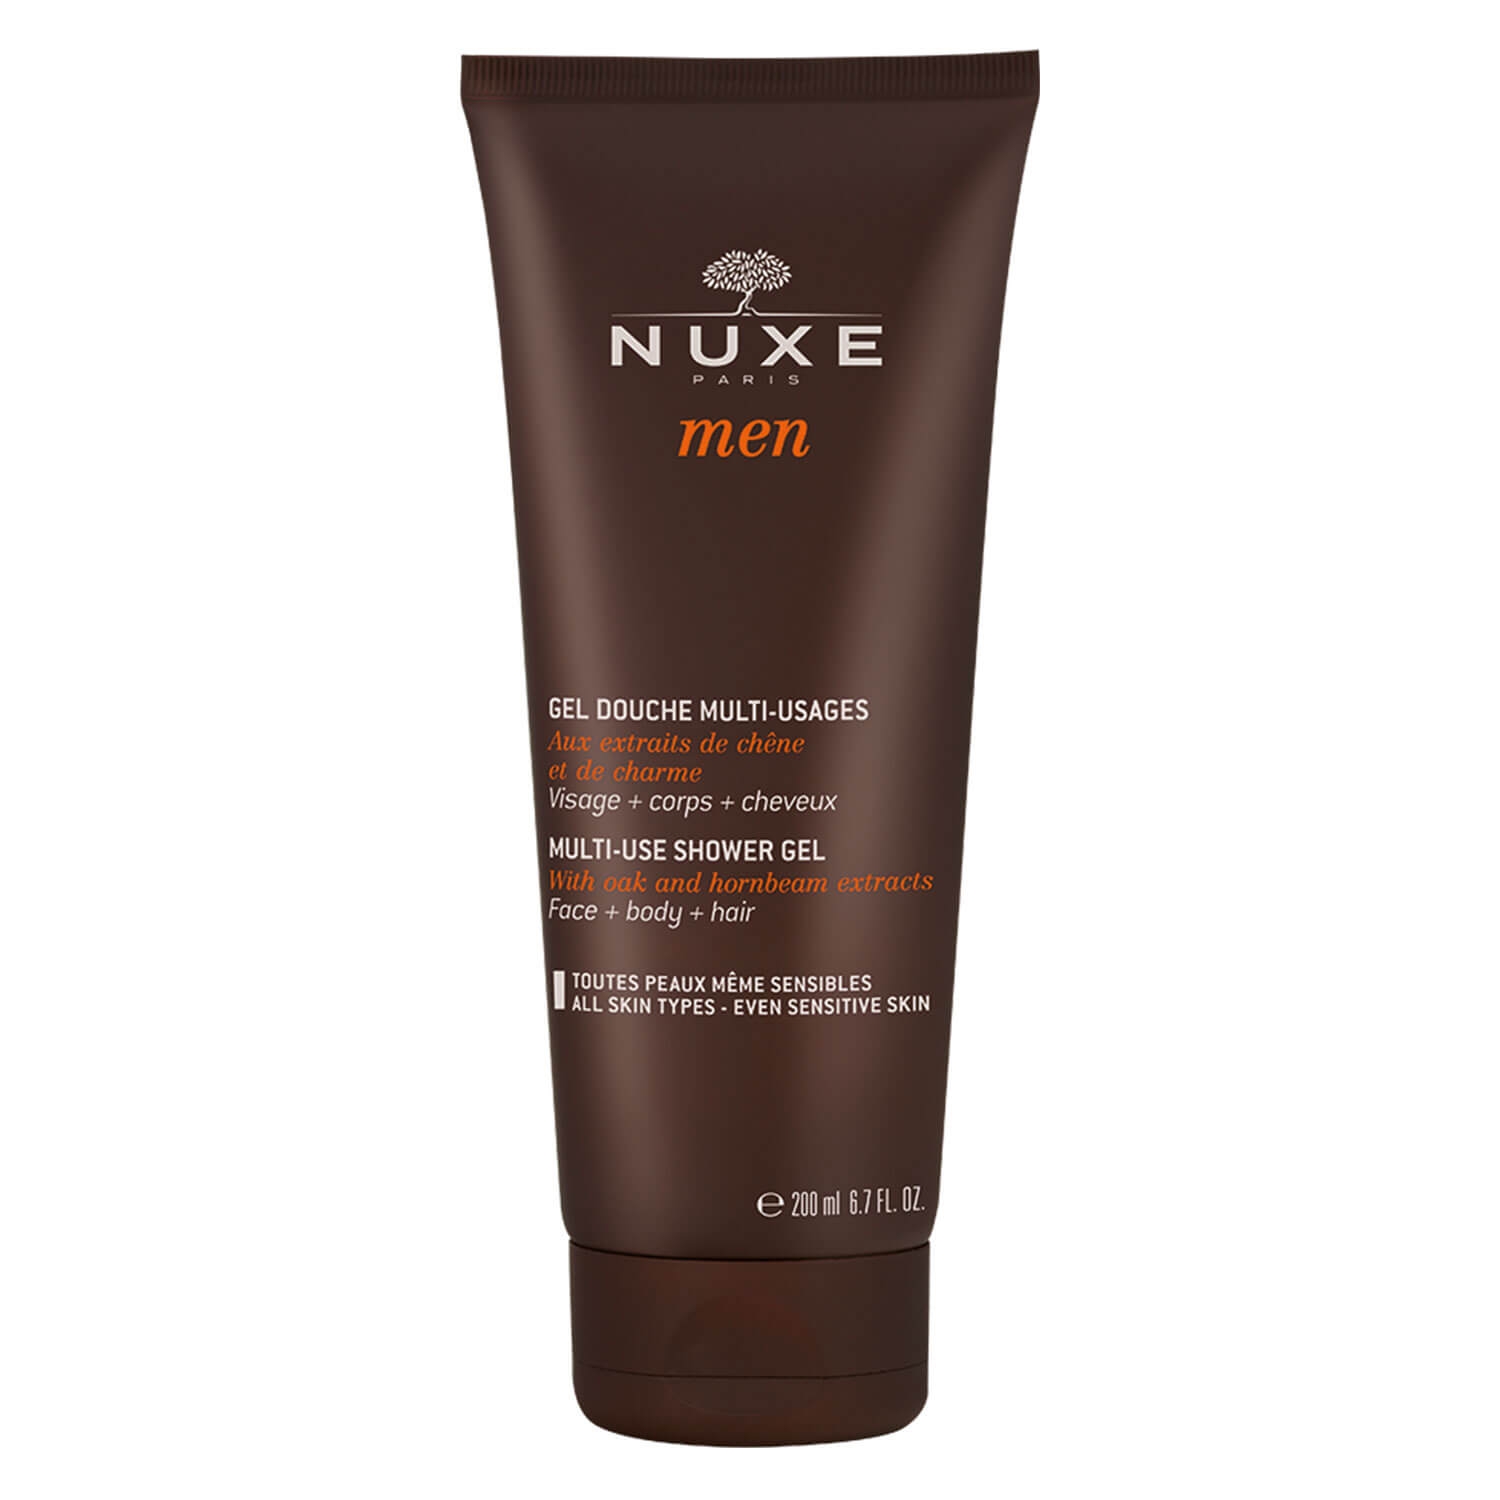 Product image from Nuxe Men - Gel douche multi-usages